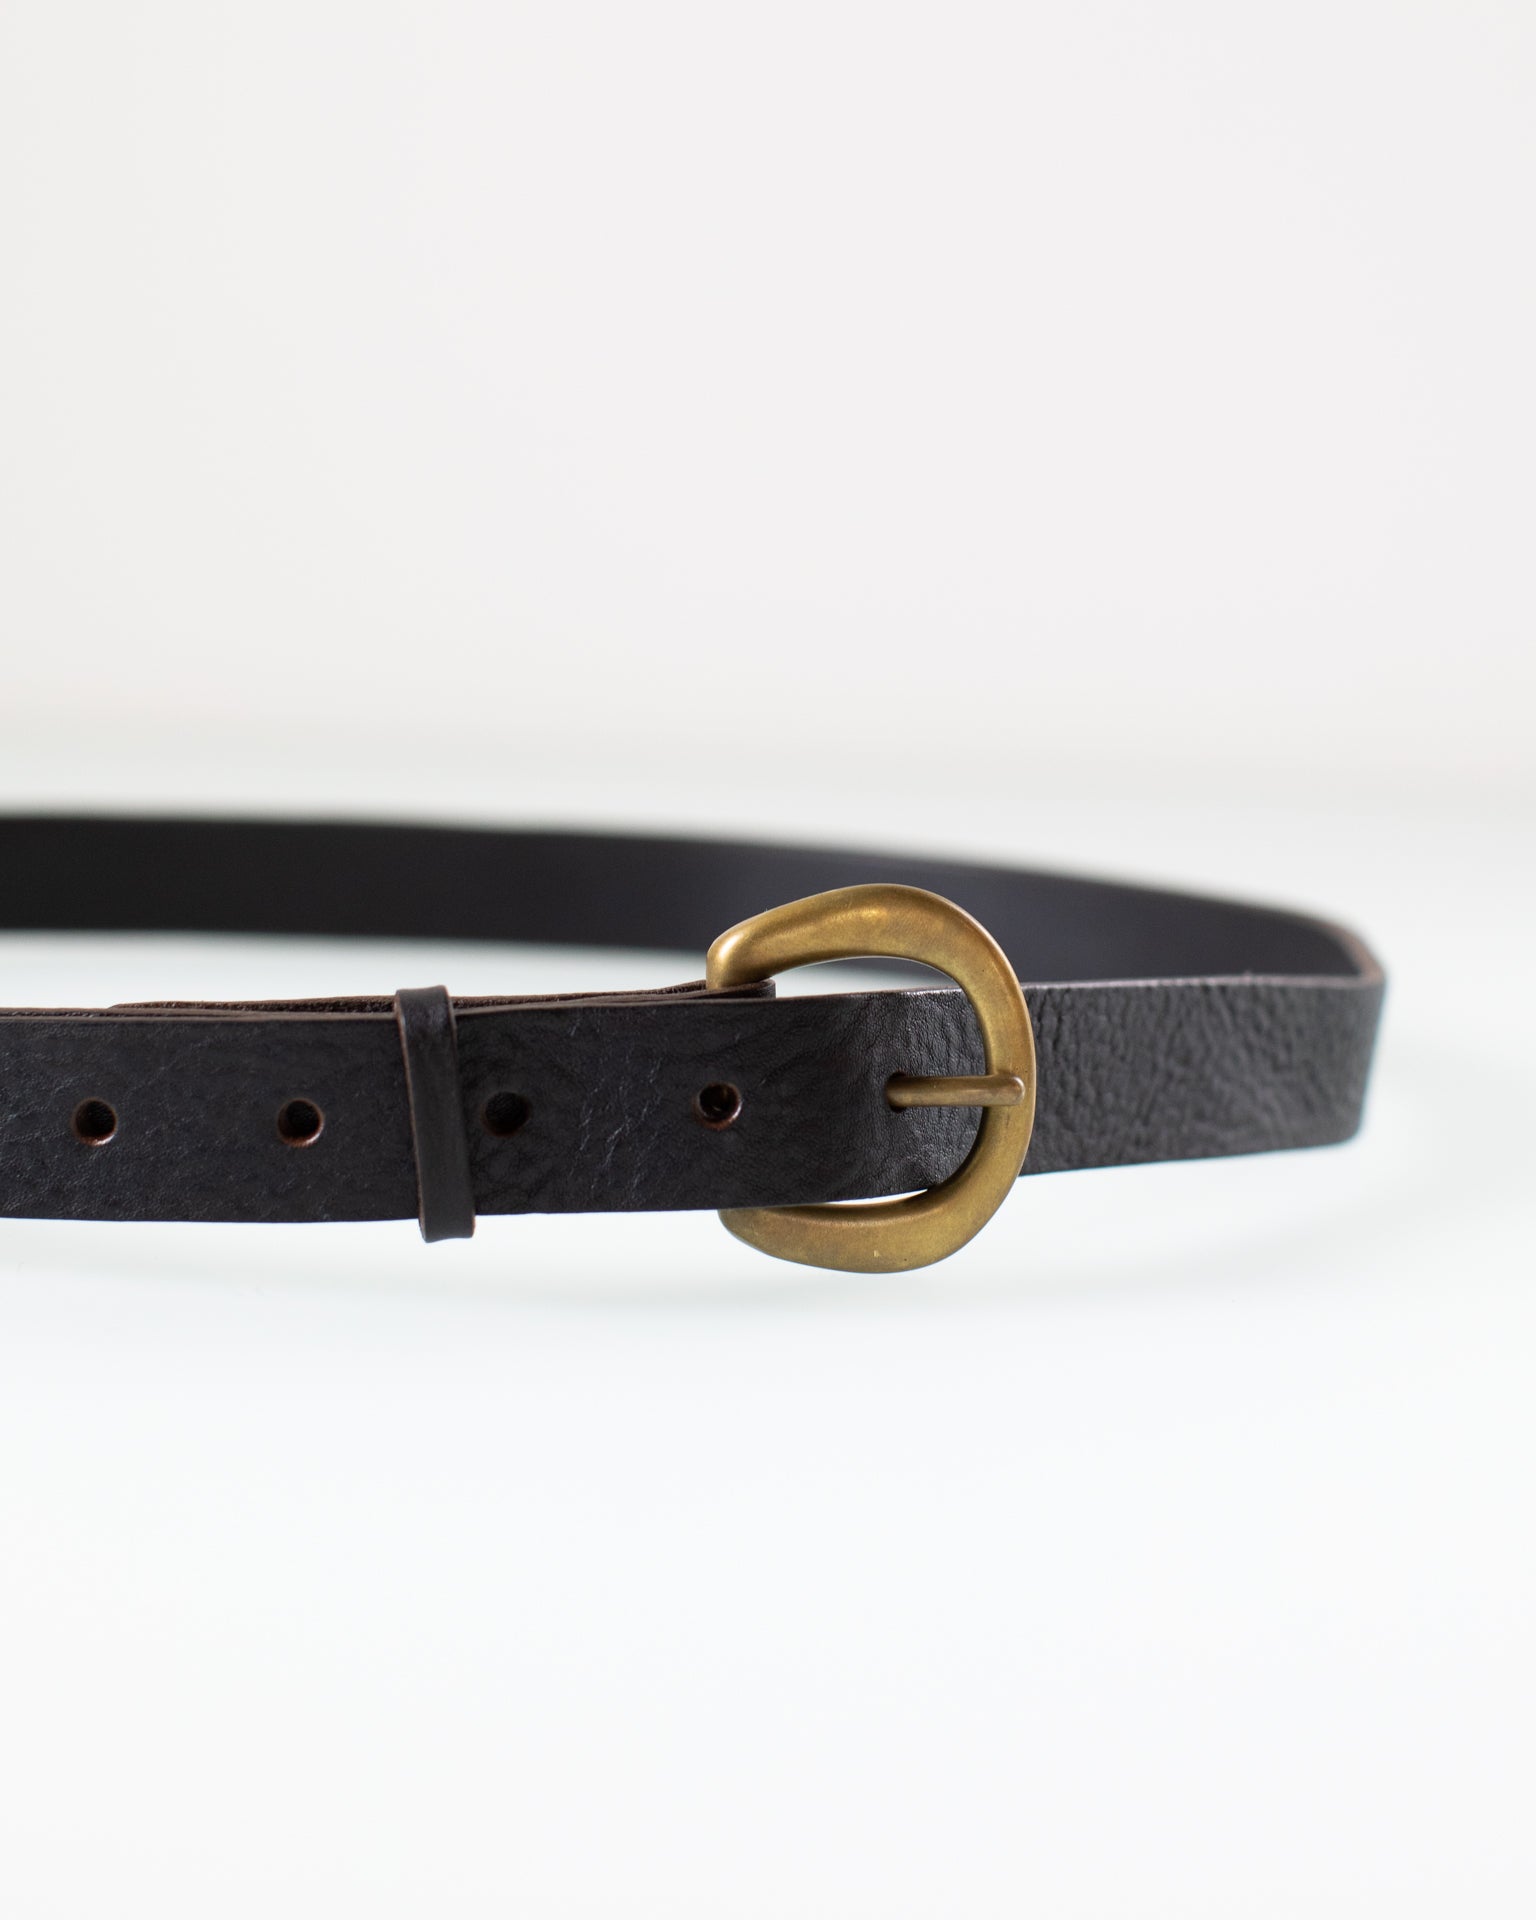 Depalma Handsewn CL 1 inch Belt in Black/Brass- Bliss Boutiques